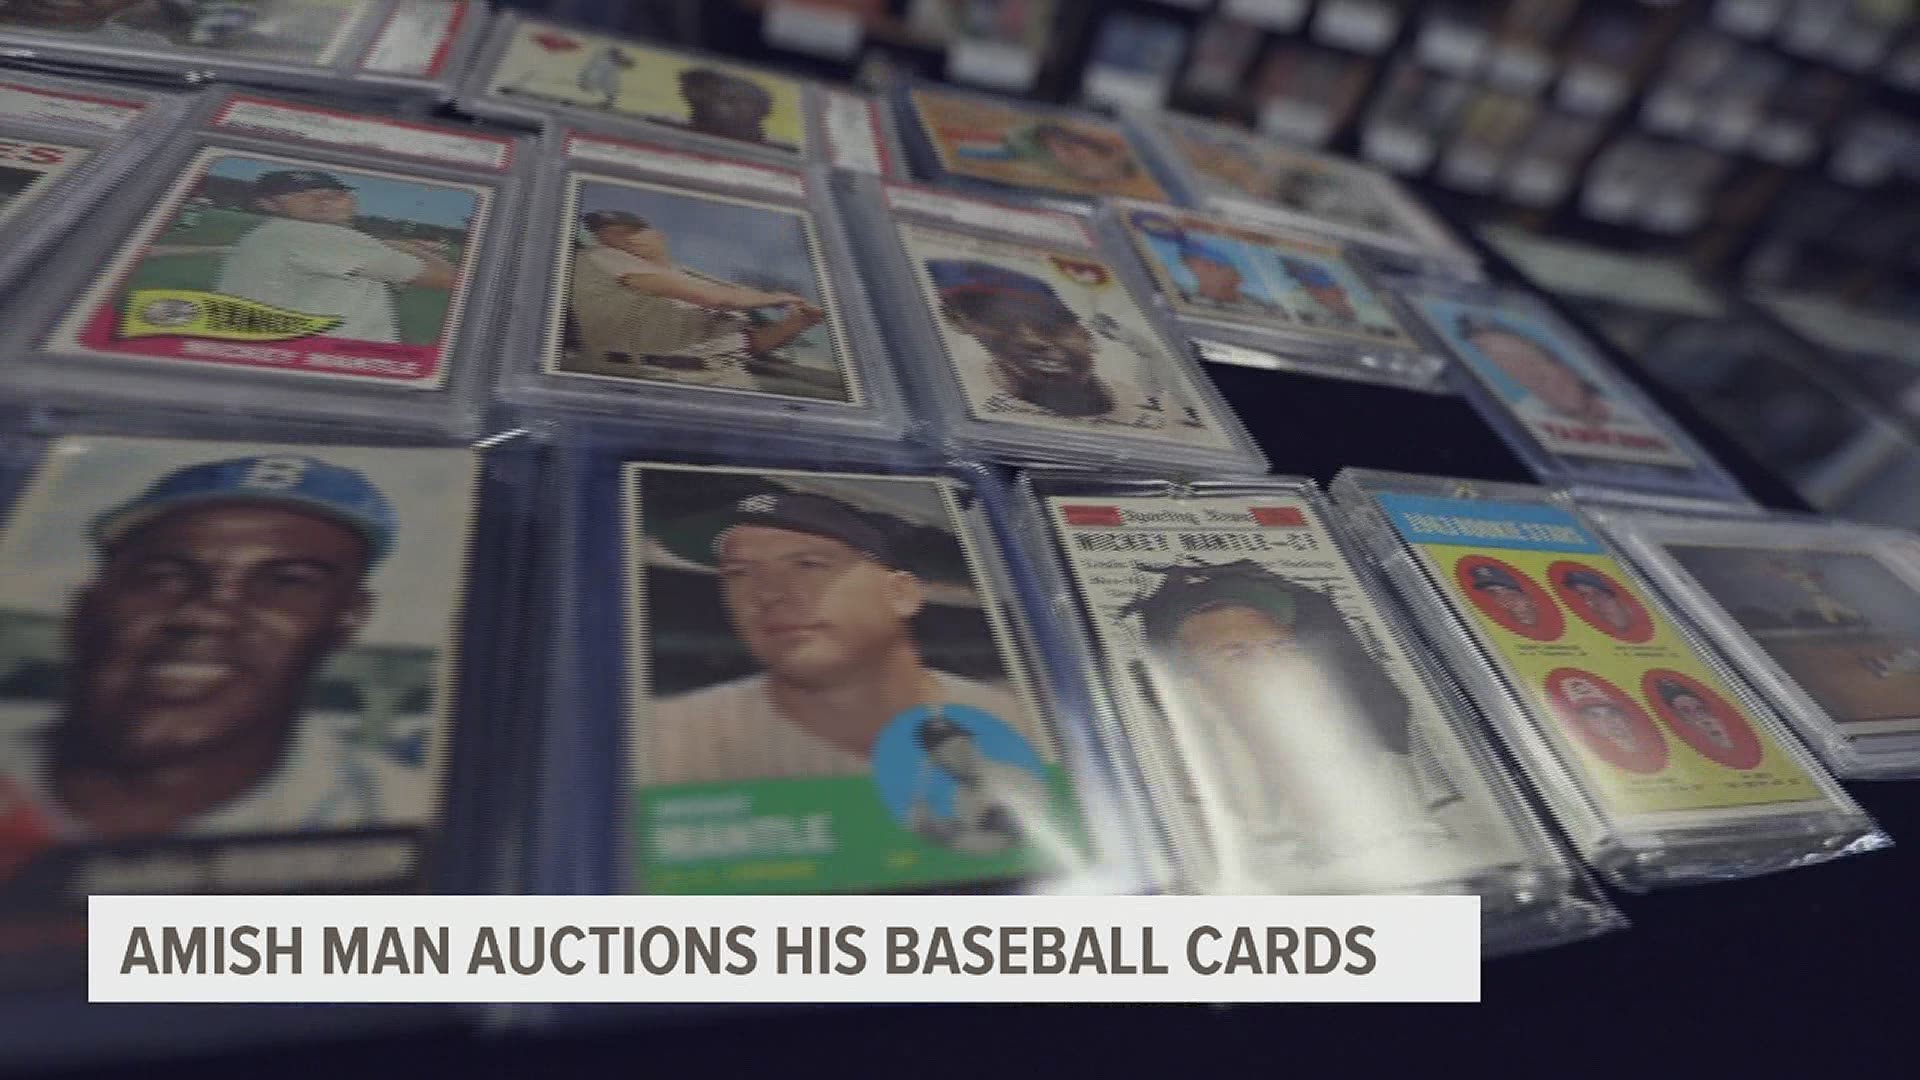 Jake Smucker's baseball card collection is worth tens of thousands of dollars, but the story behind his cards is priceless.